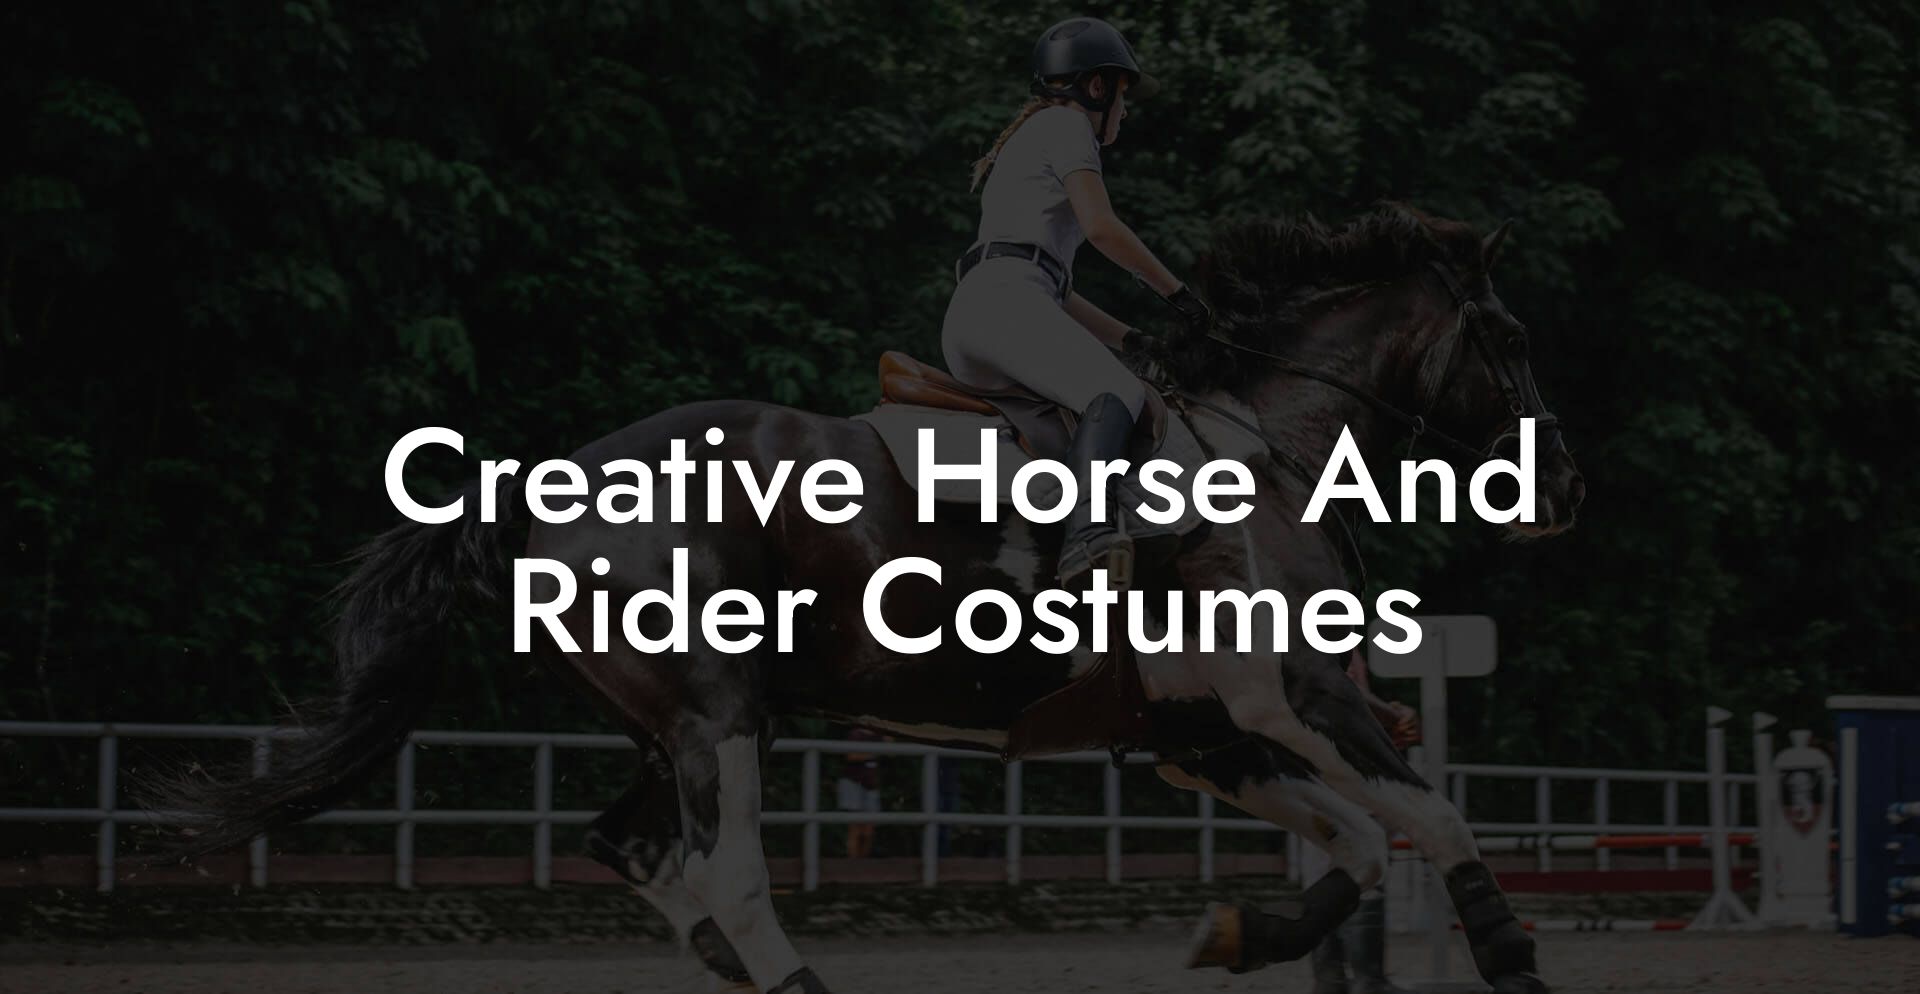 Creative Horse And Rider Costumes